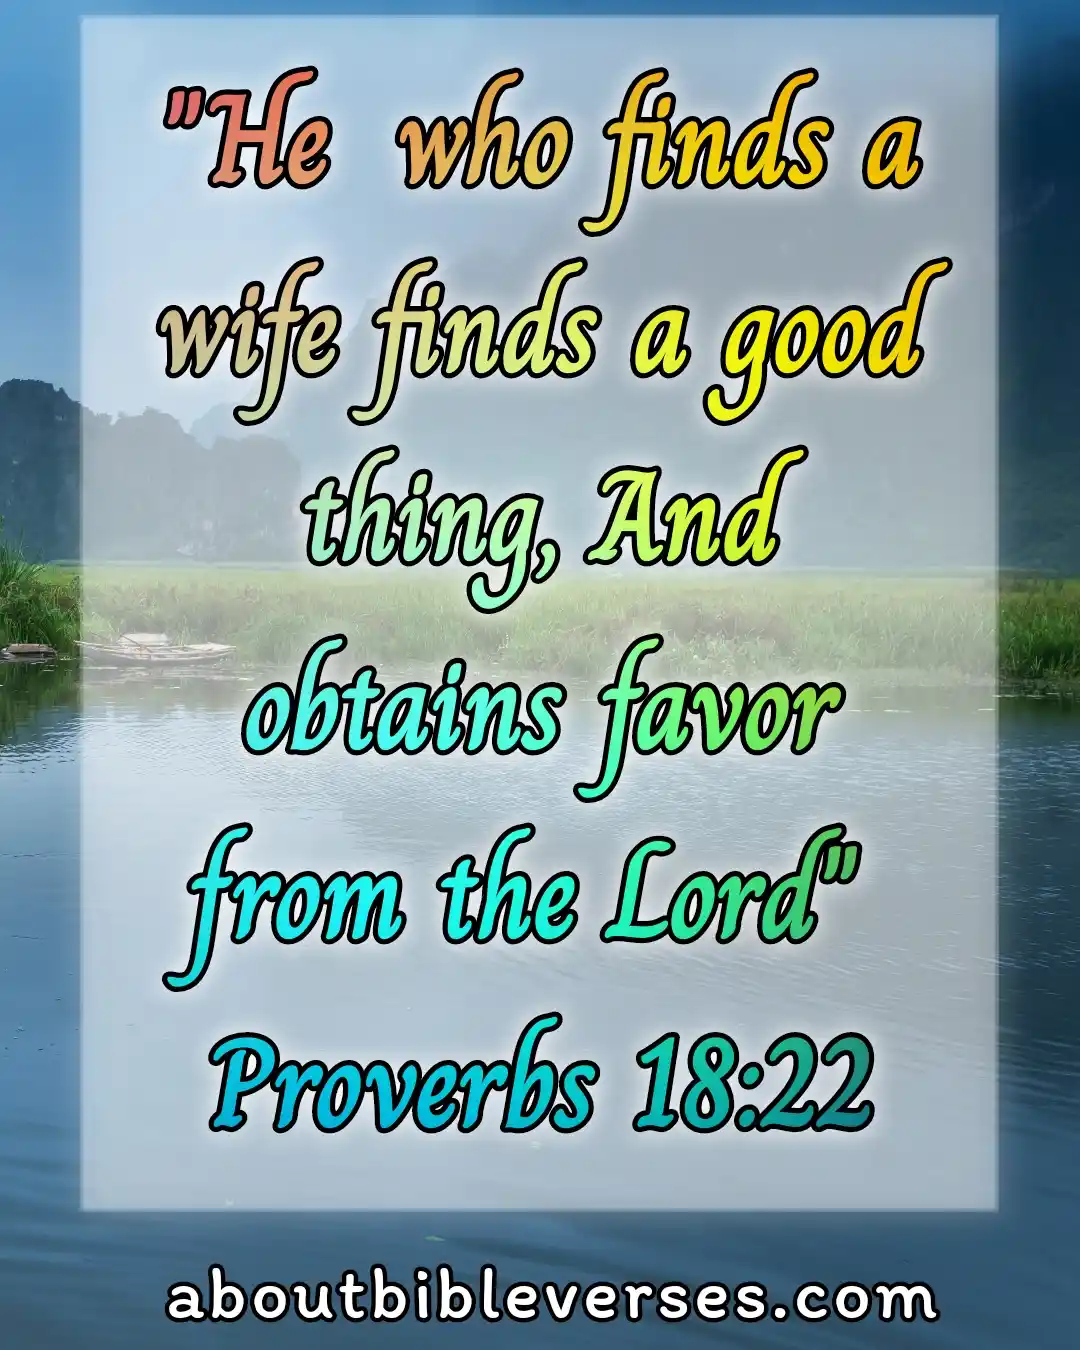 bible verses husband and wife relationship (Proverbs 18:22)